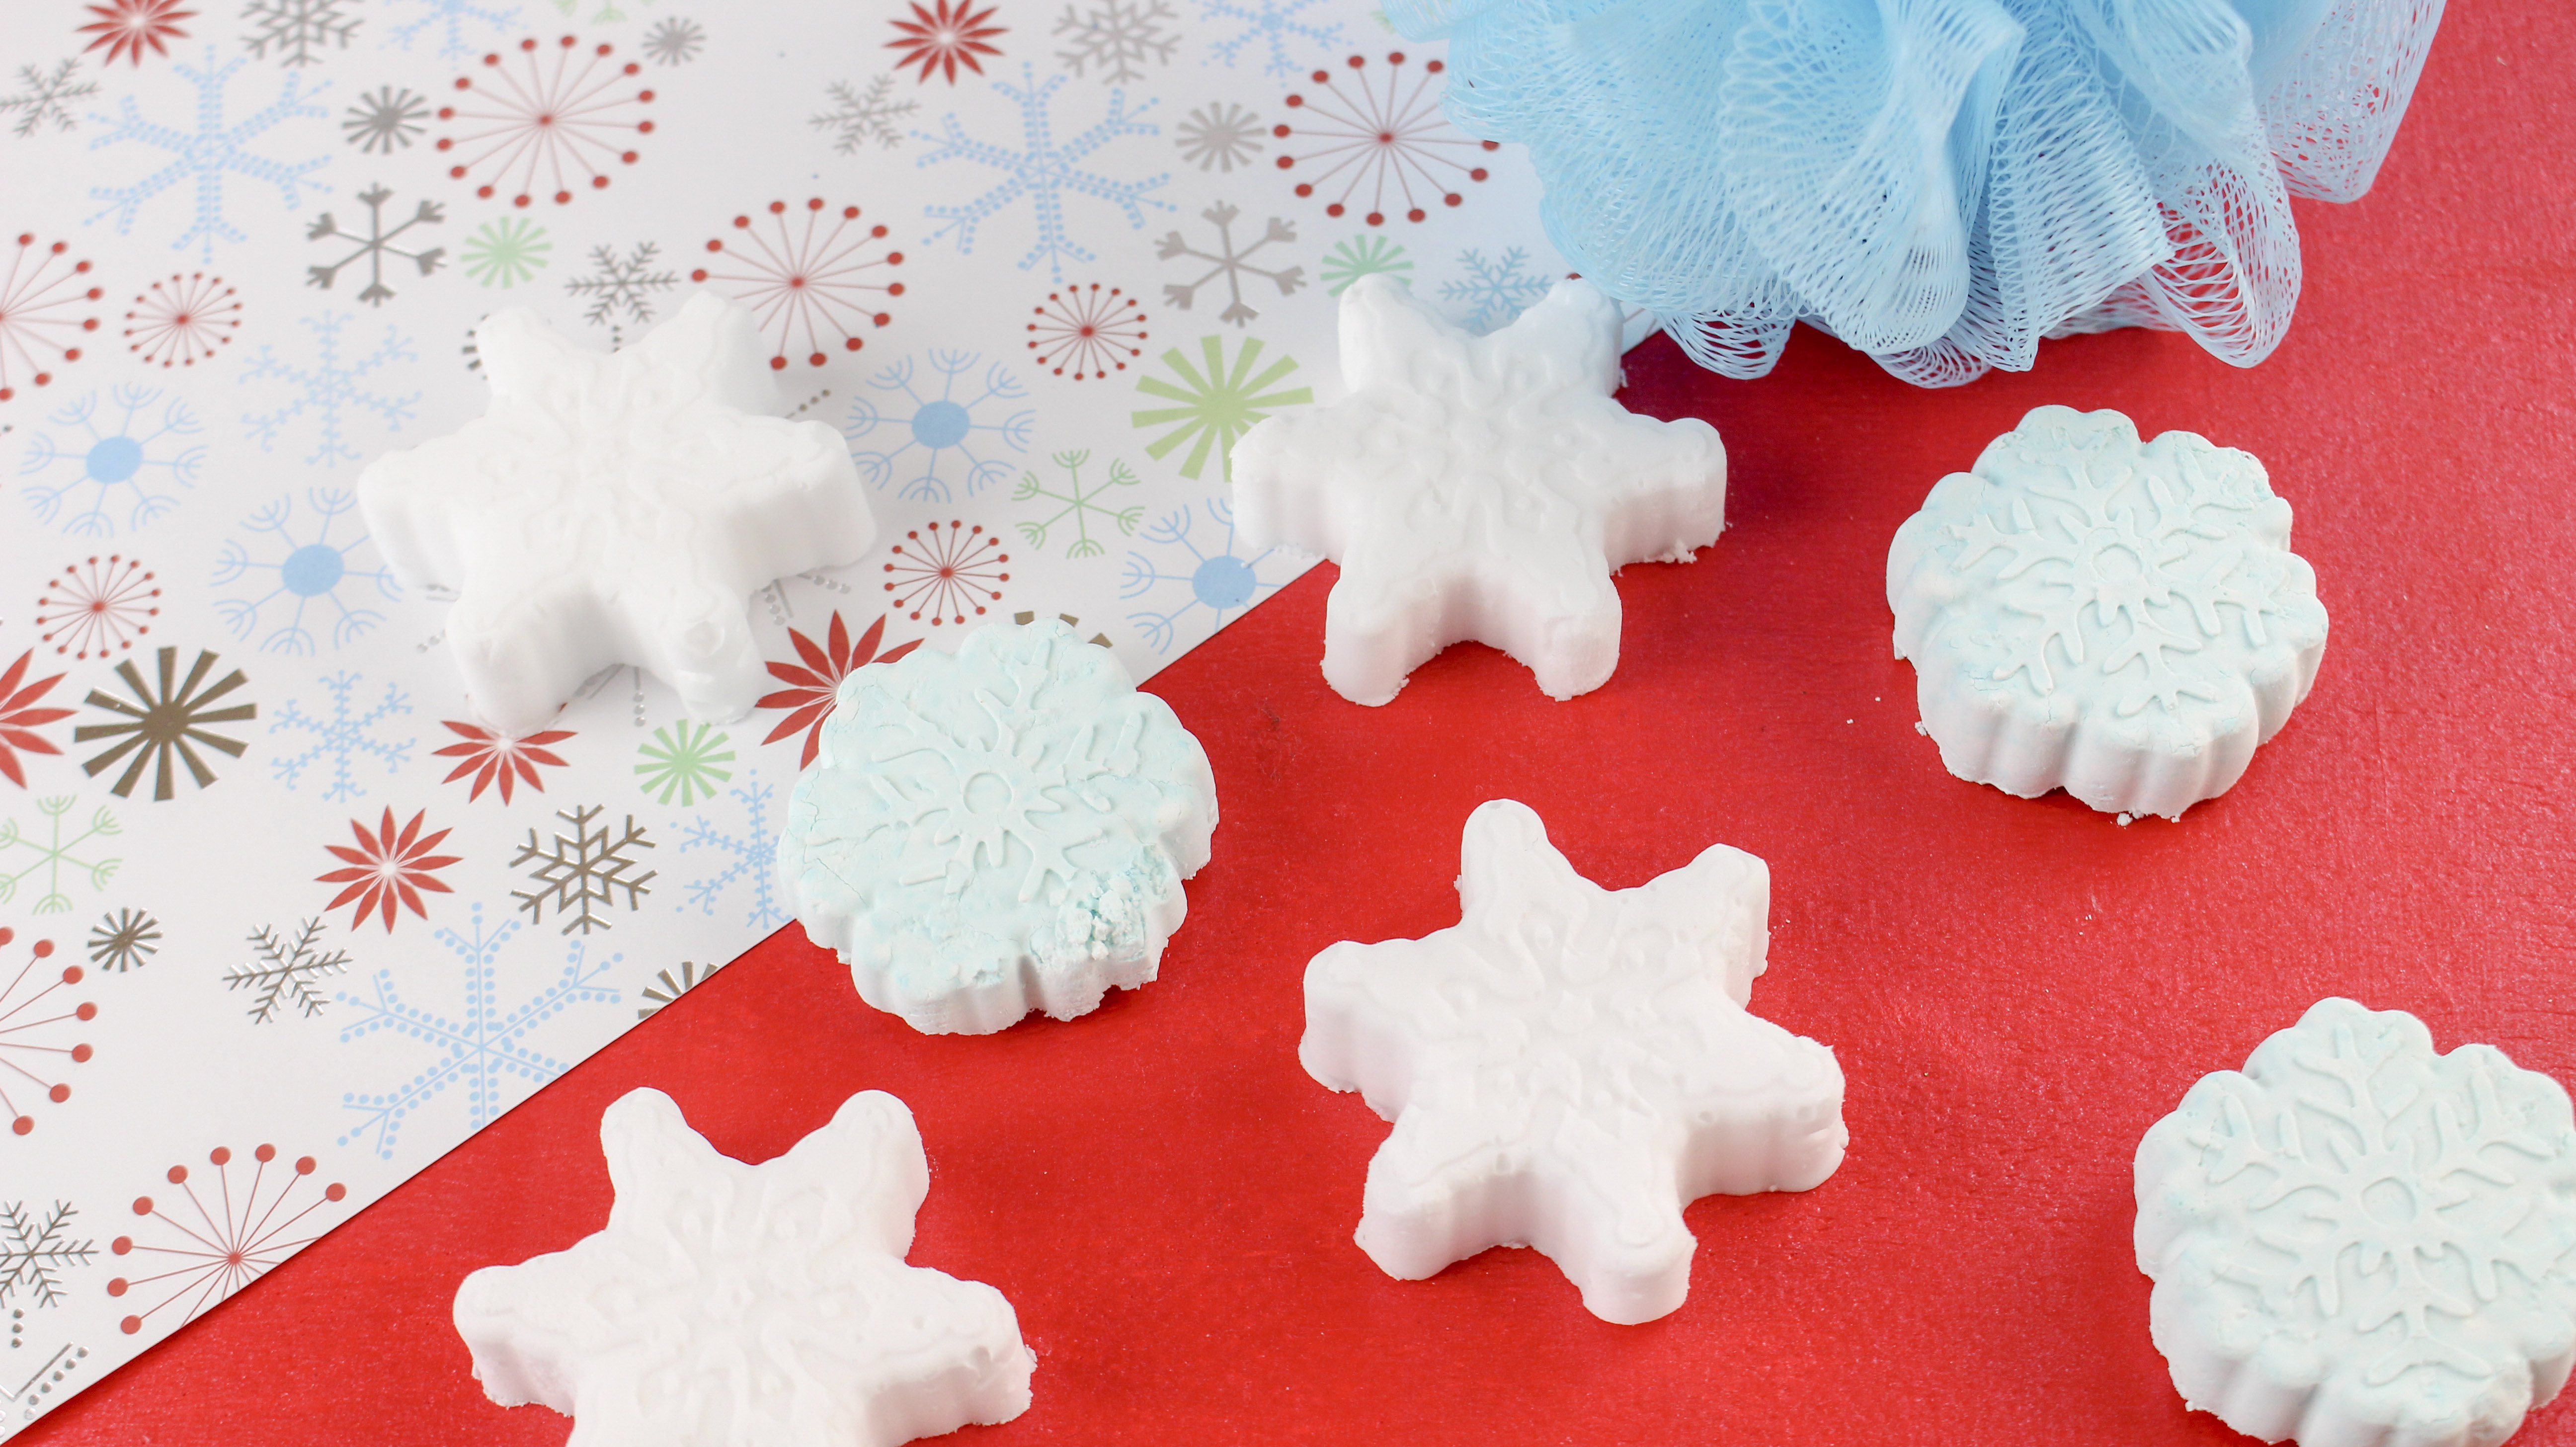 Snowflake peppermint shower steamers on festive paper with blue body wash pouf.